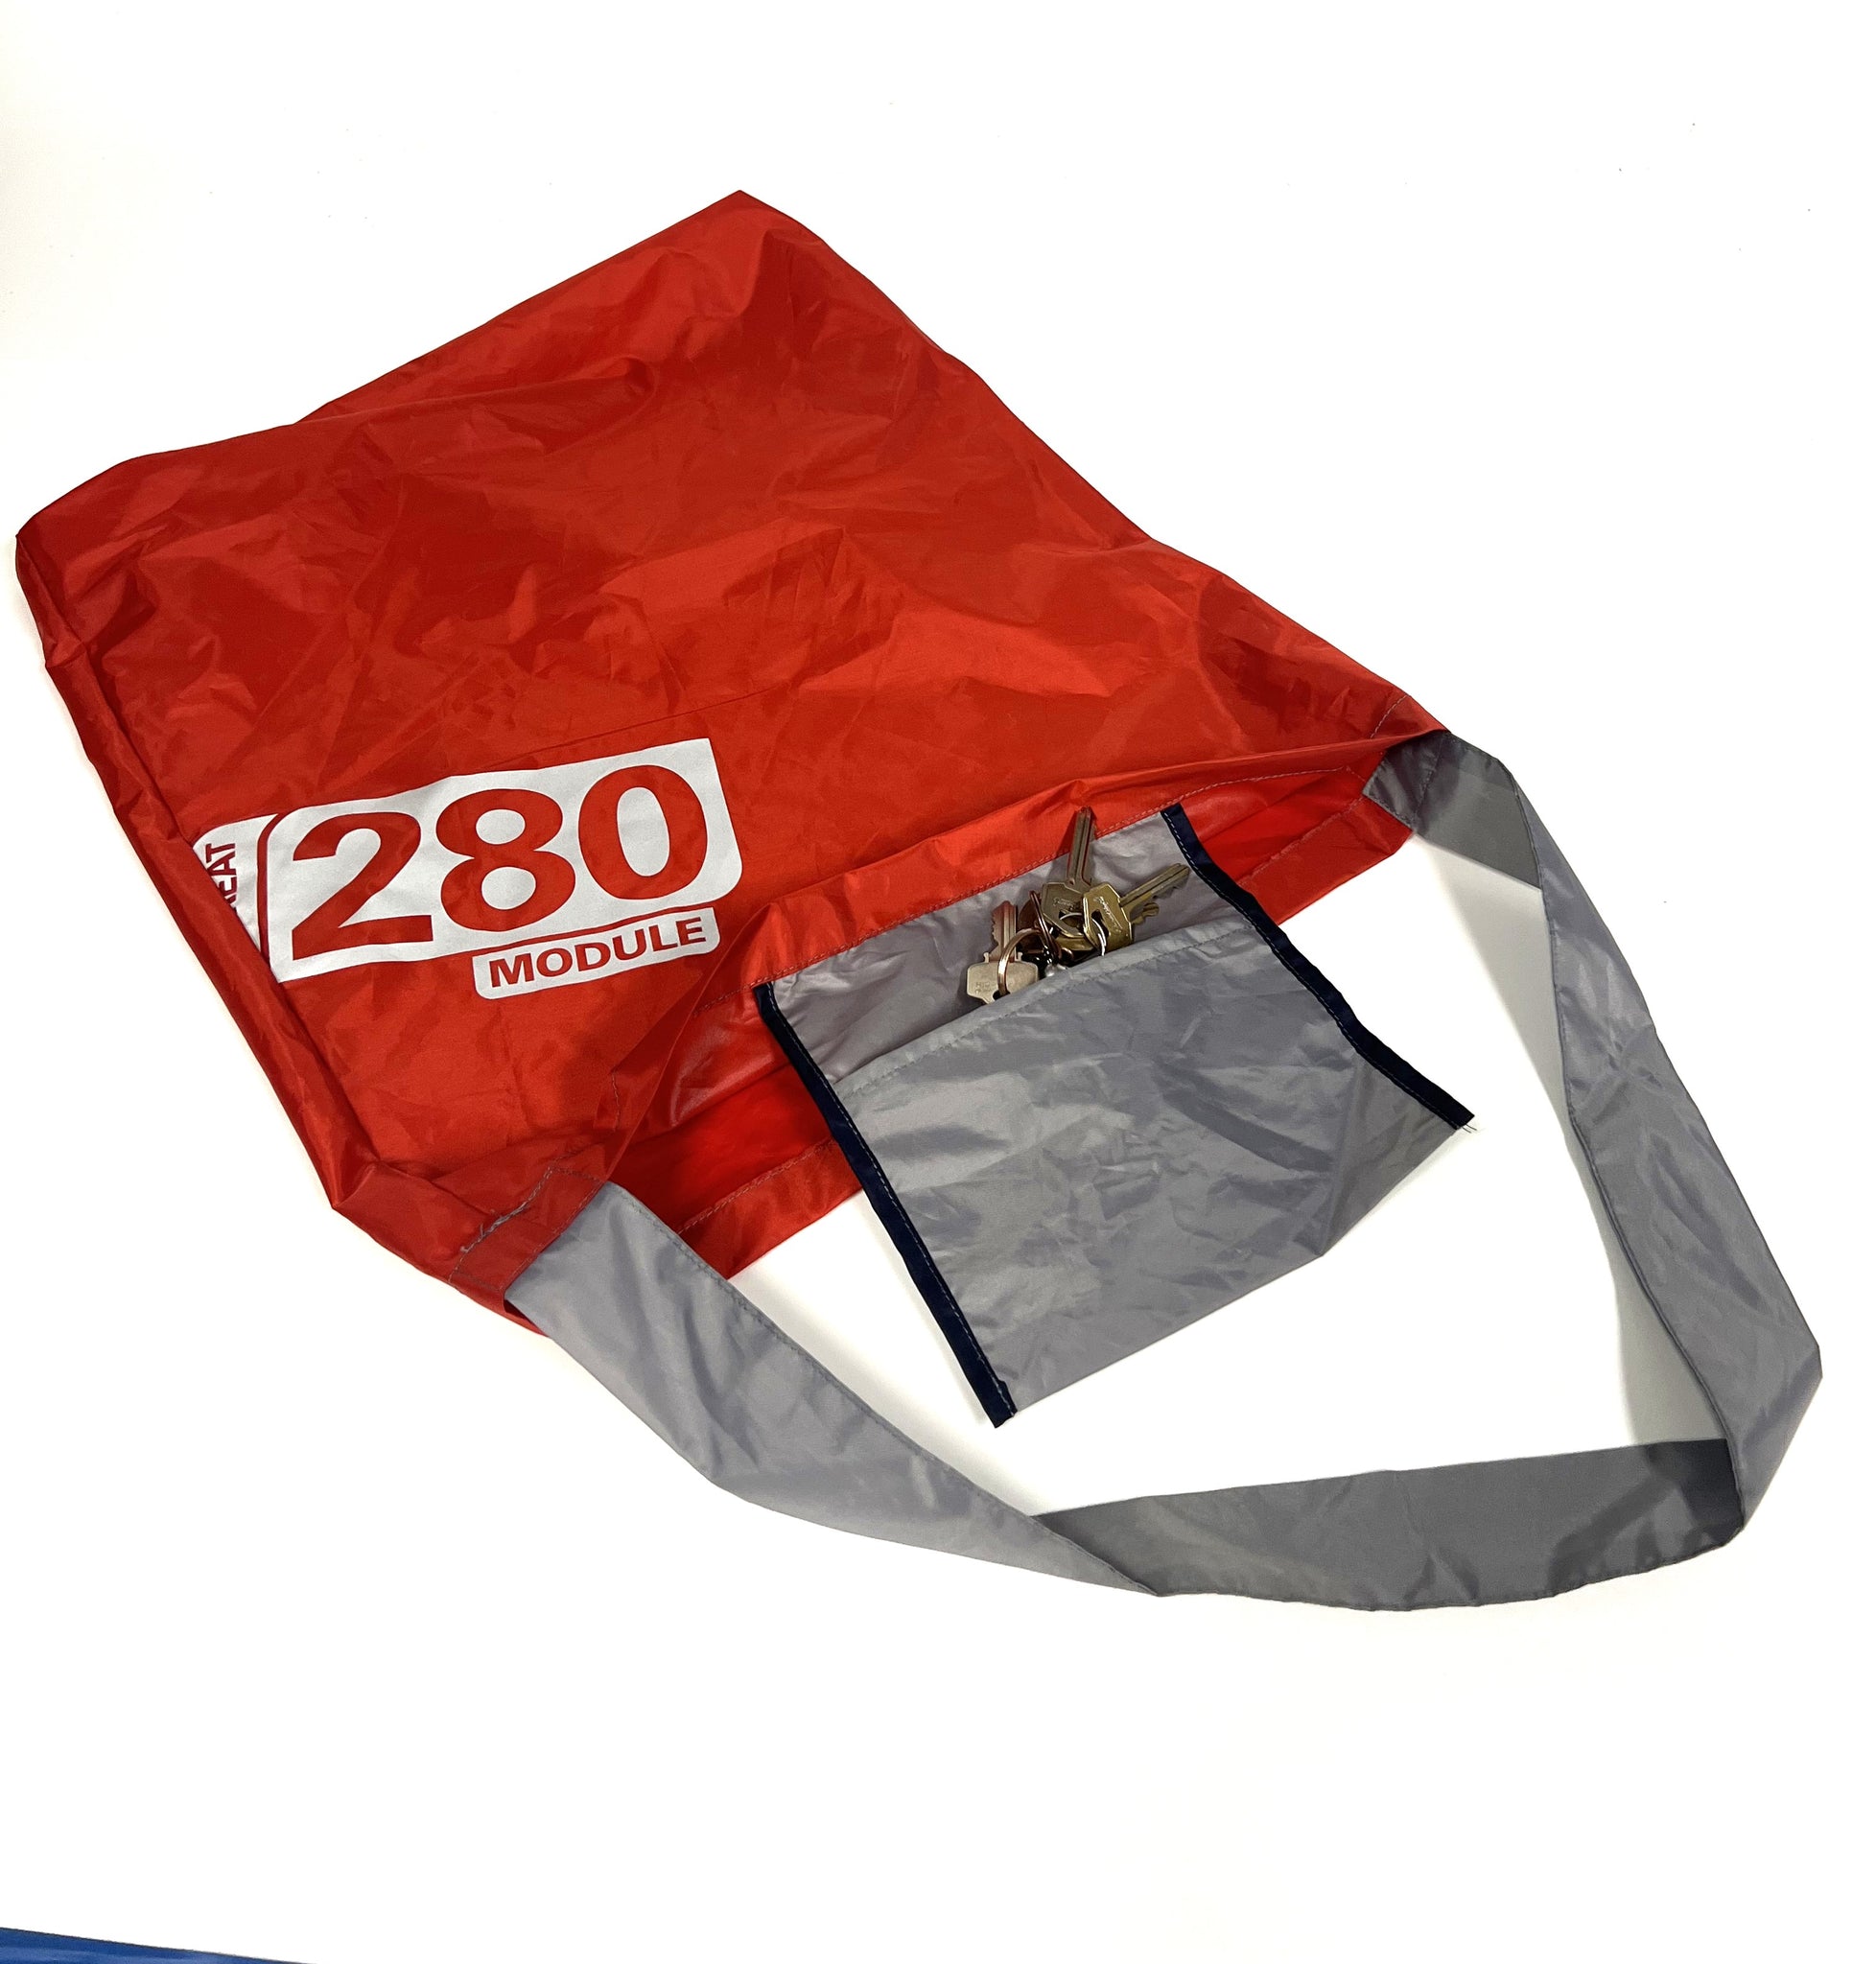 Red & Grey R4 Market Bag with pocket shown on a white background